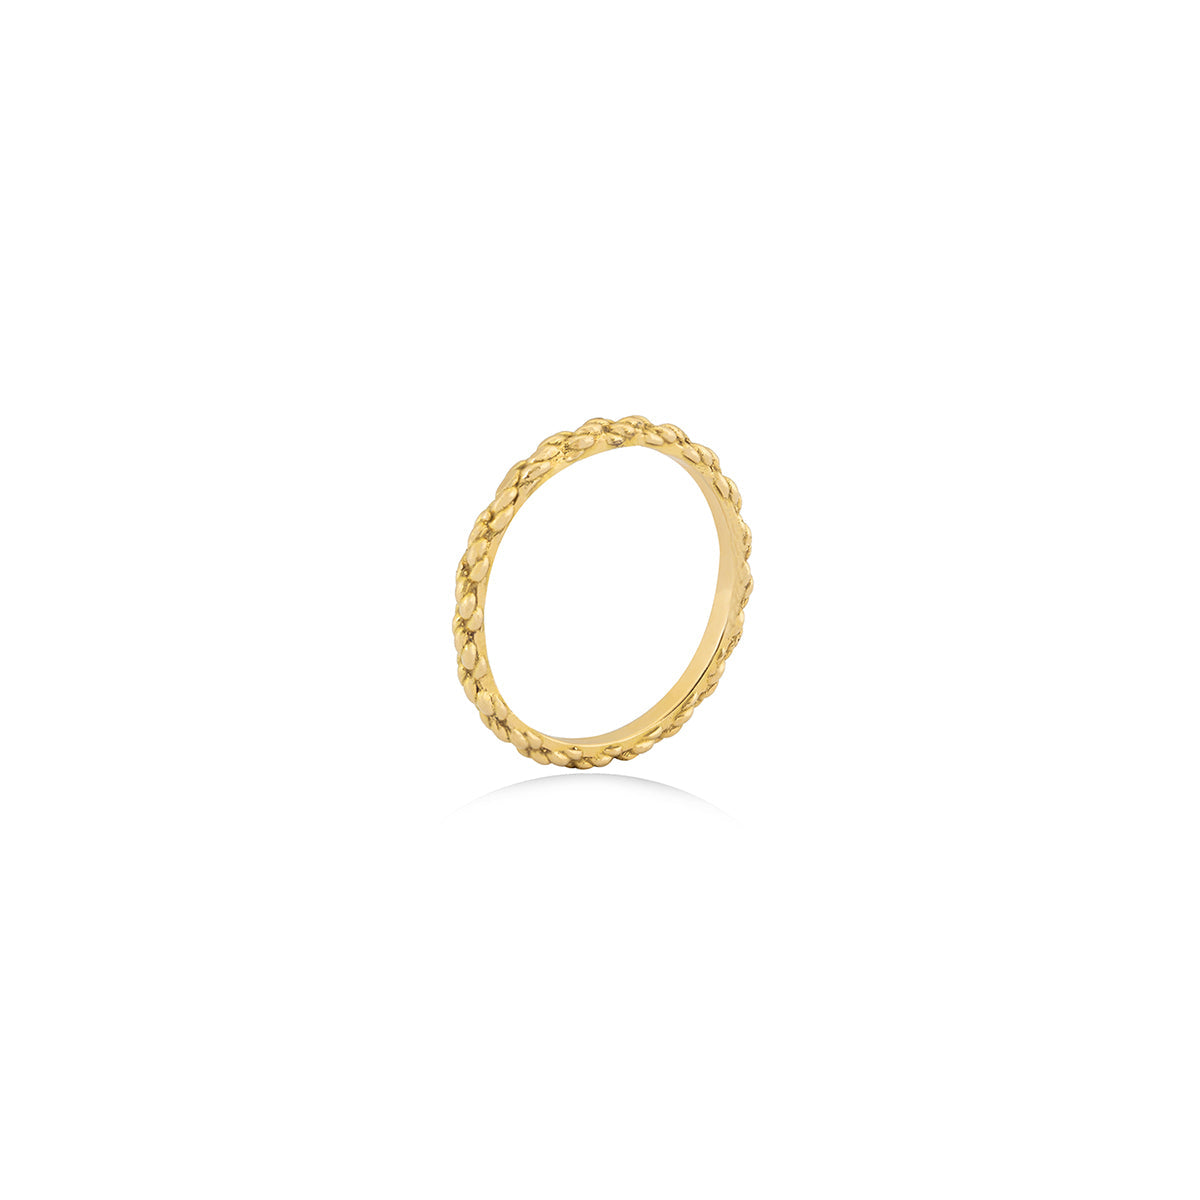 Engagement Band in 18k Yellow gold